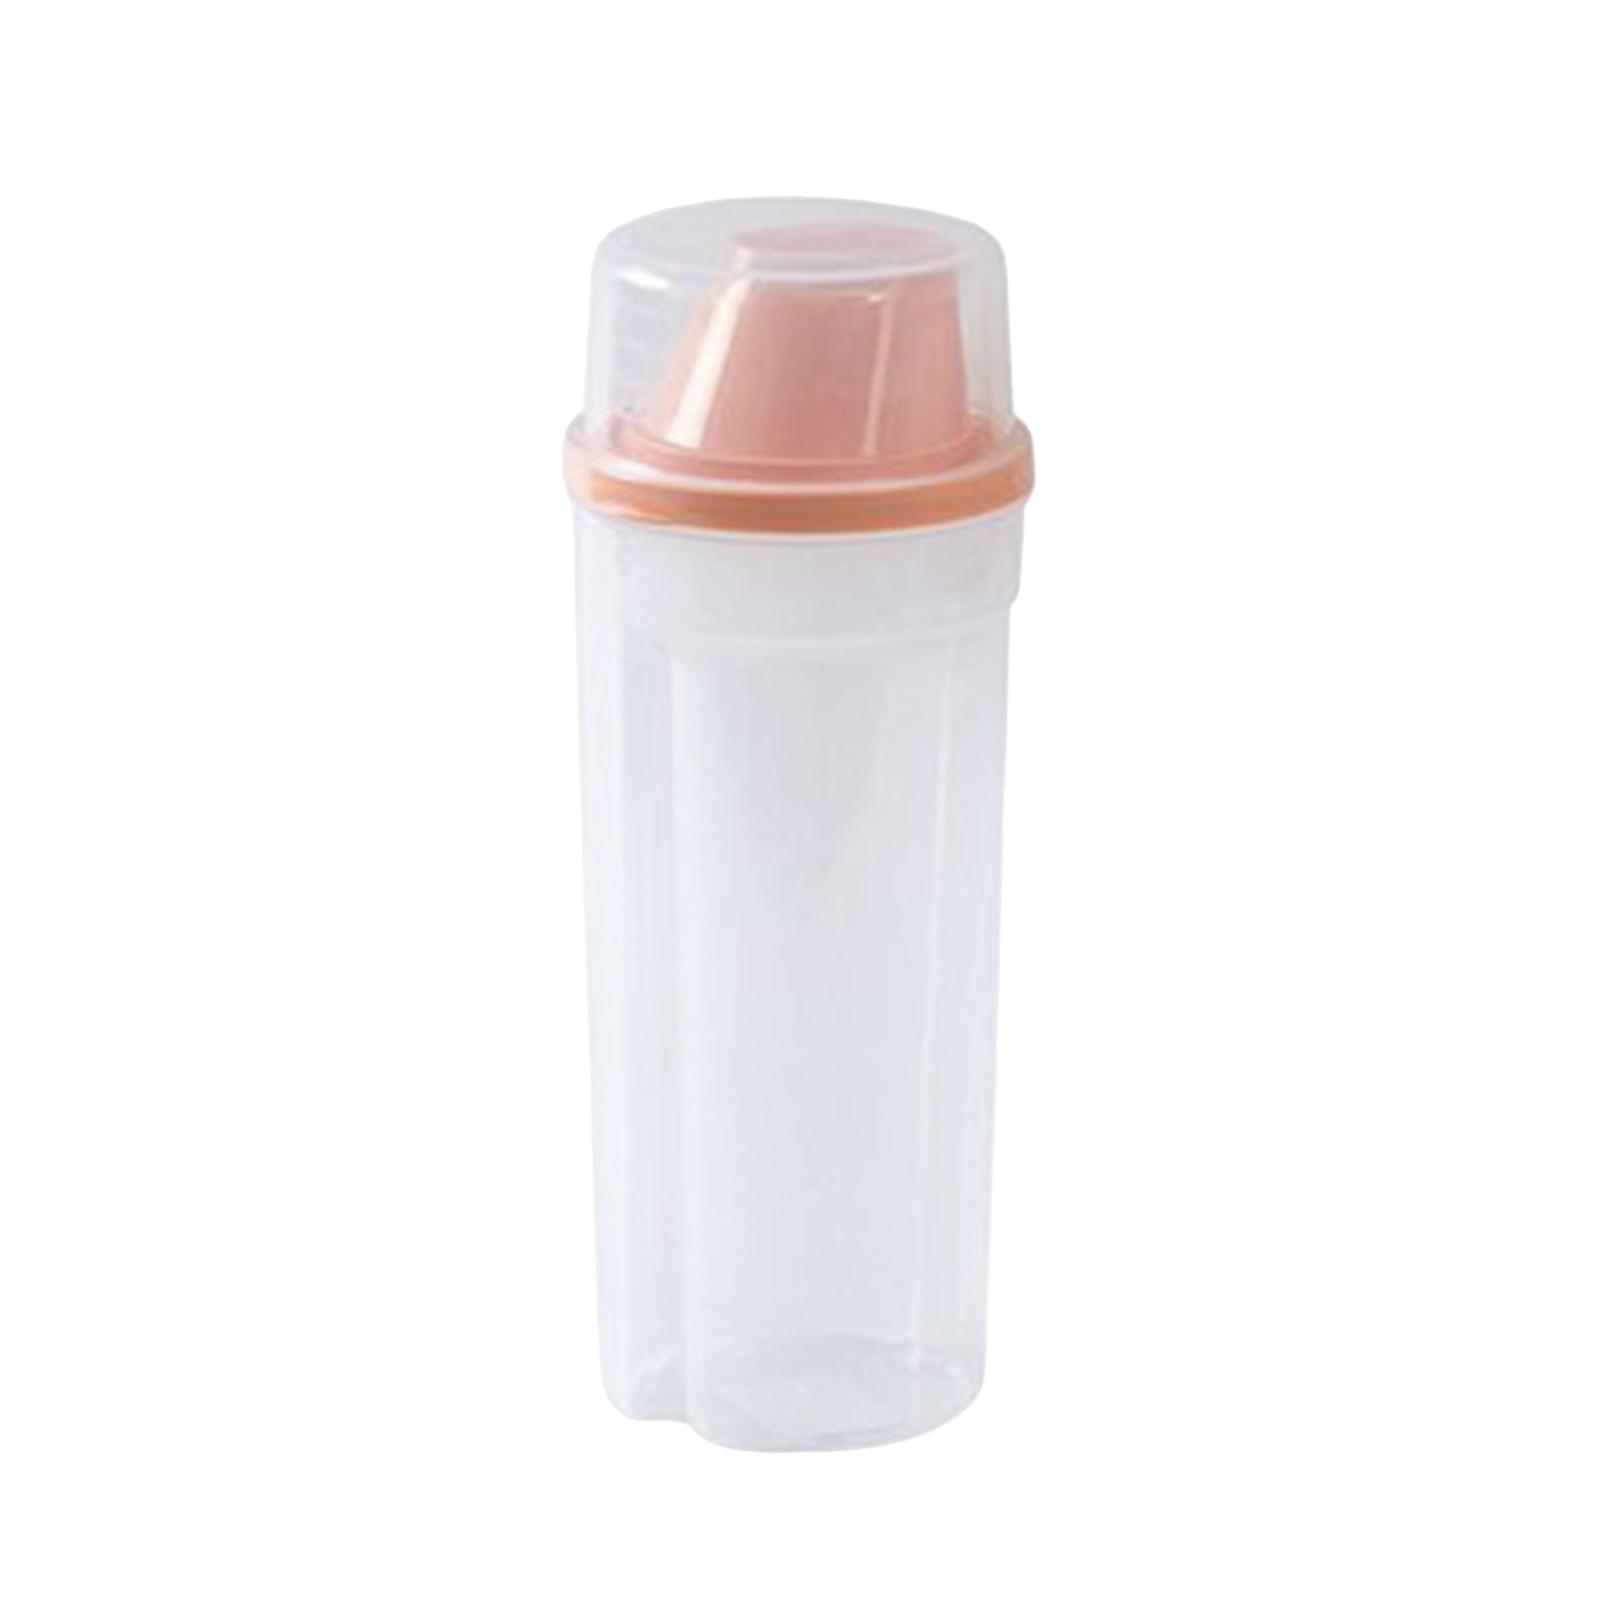 Sealed Cereal Container Food Dispenser Rice Storage Bin for Sugar Cereal